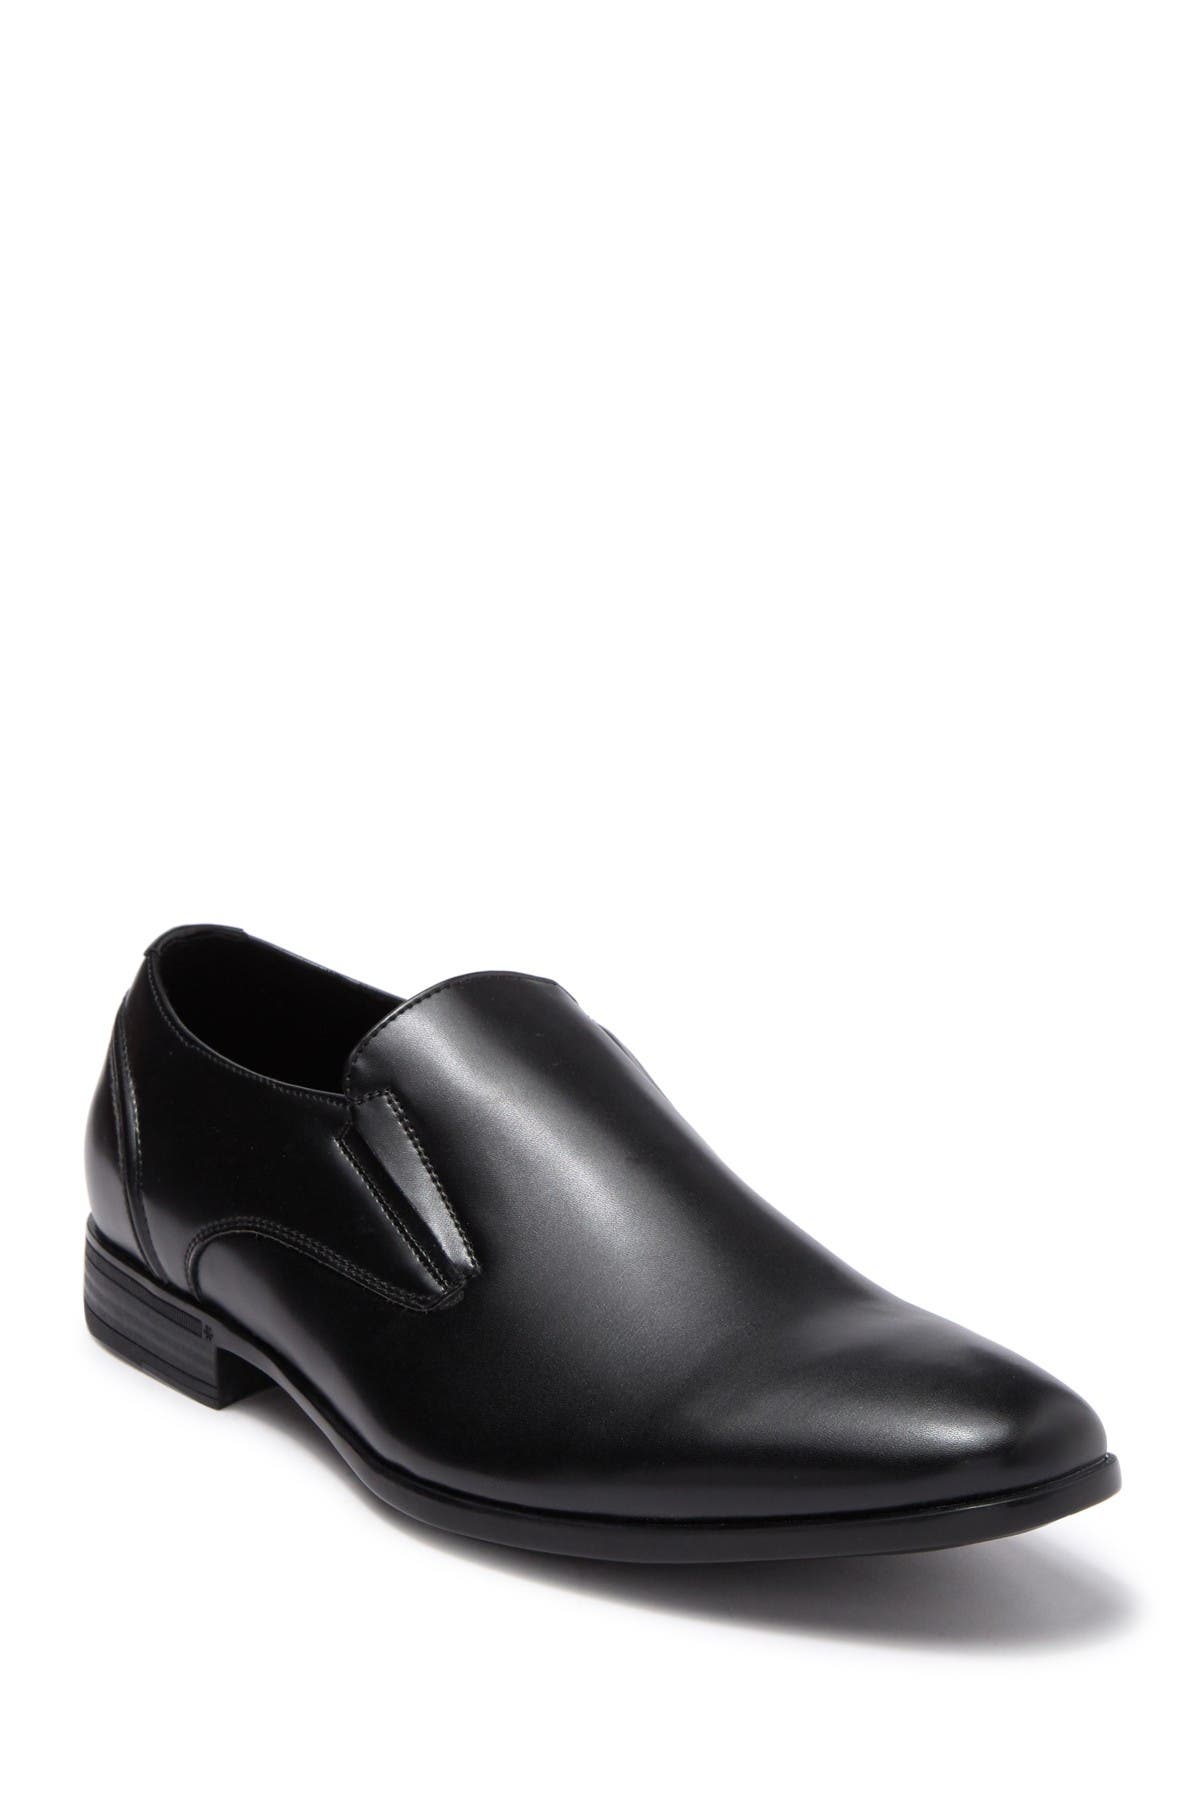 kenneth cole reaction slip on shoes